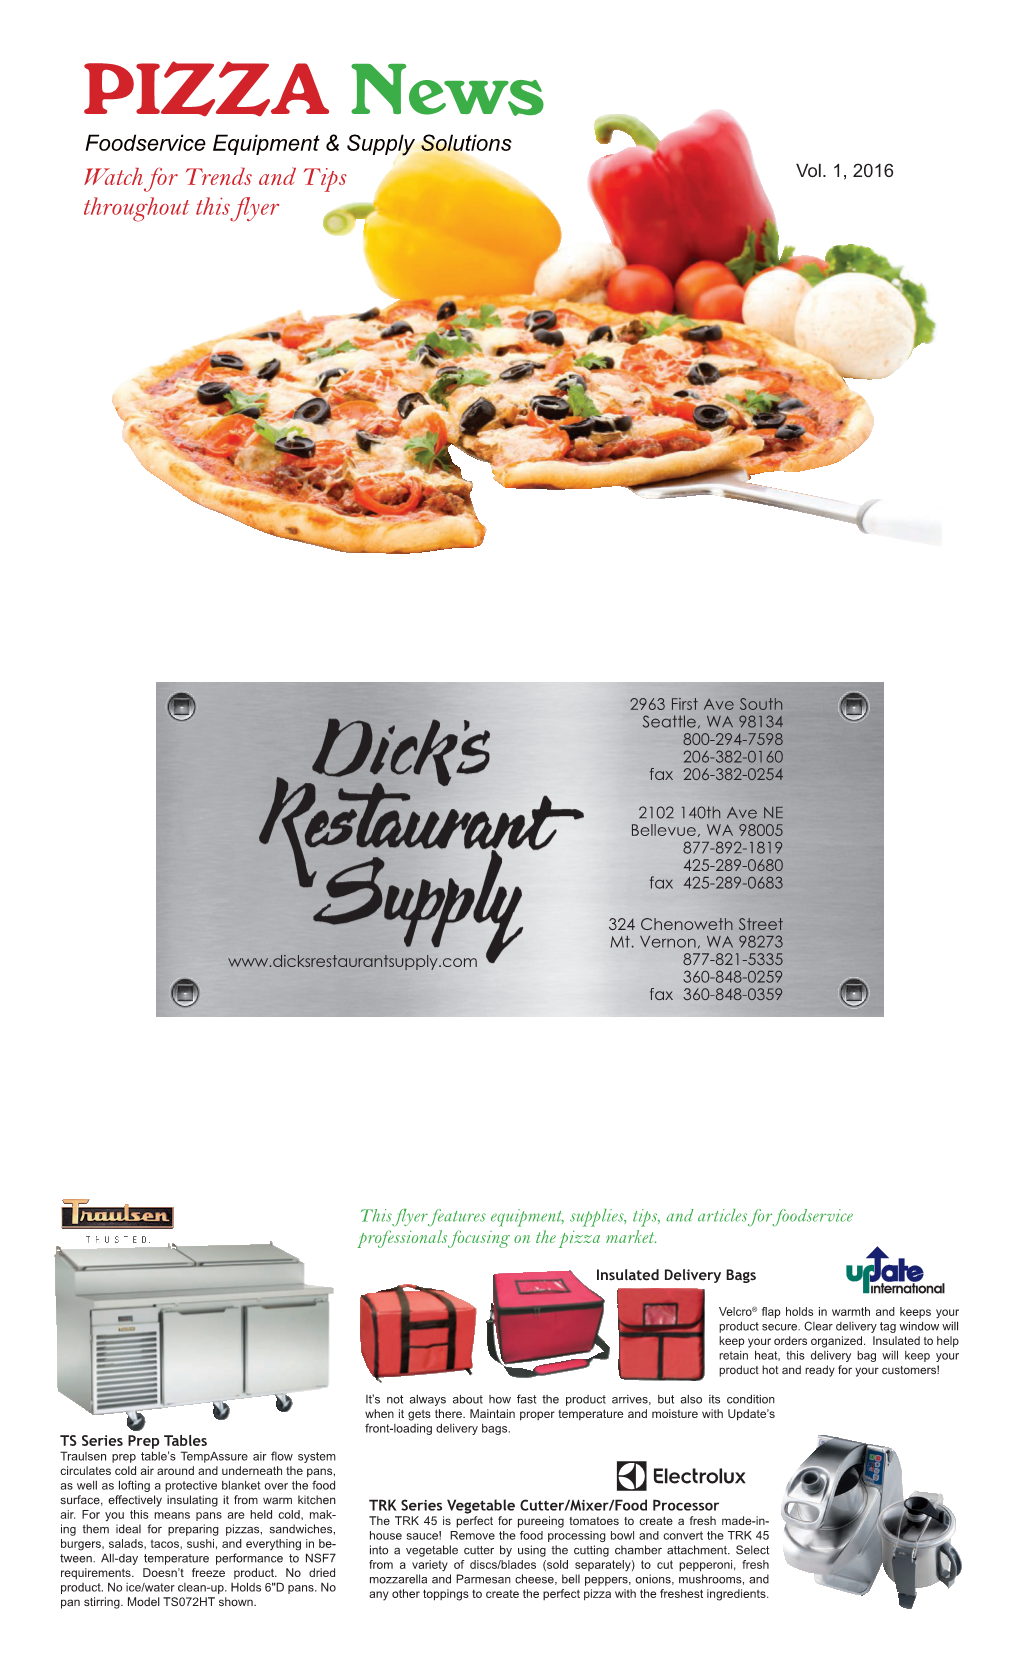 PIZZA News Foodservice Equipment & Supply Solutions Watch for Trends and Tips Vol